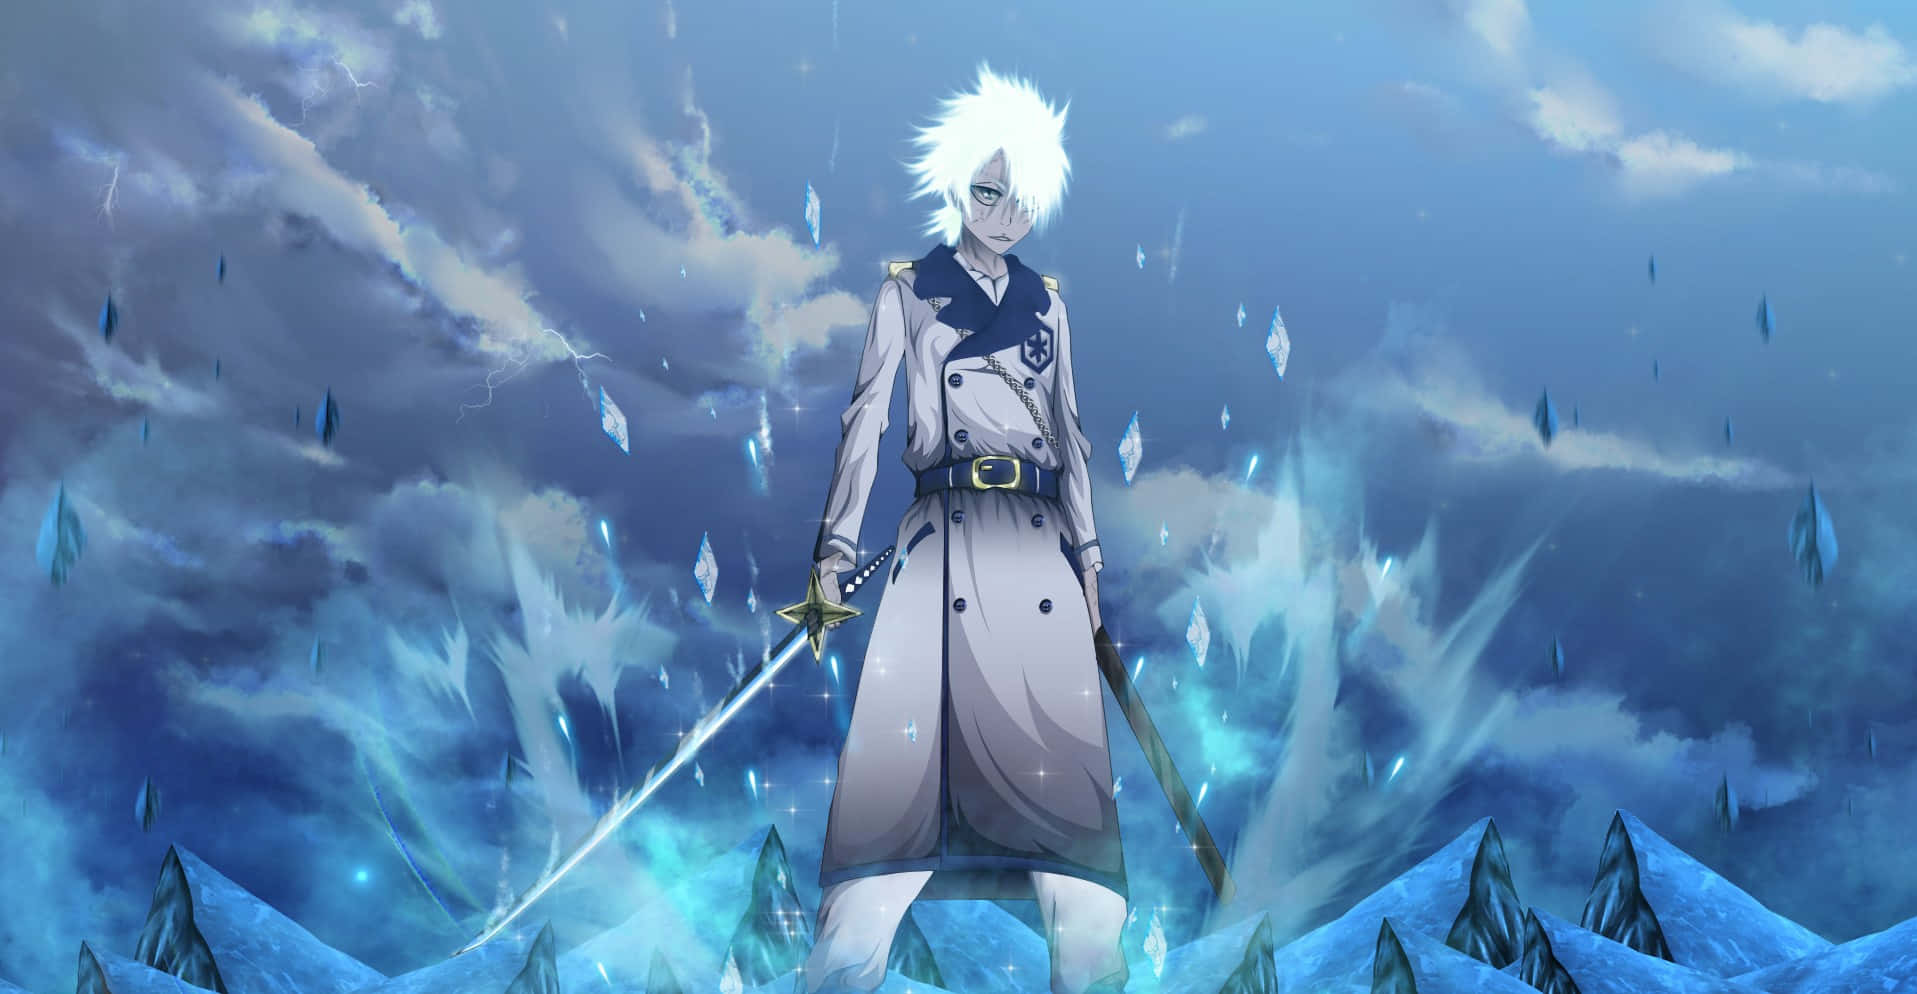 Toshiro Hitsugaya, Captain of the 10th Division in the Gotei 13 Wallpaper